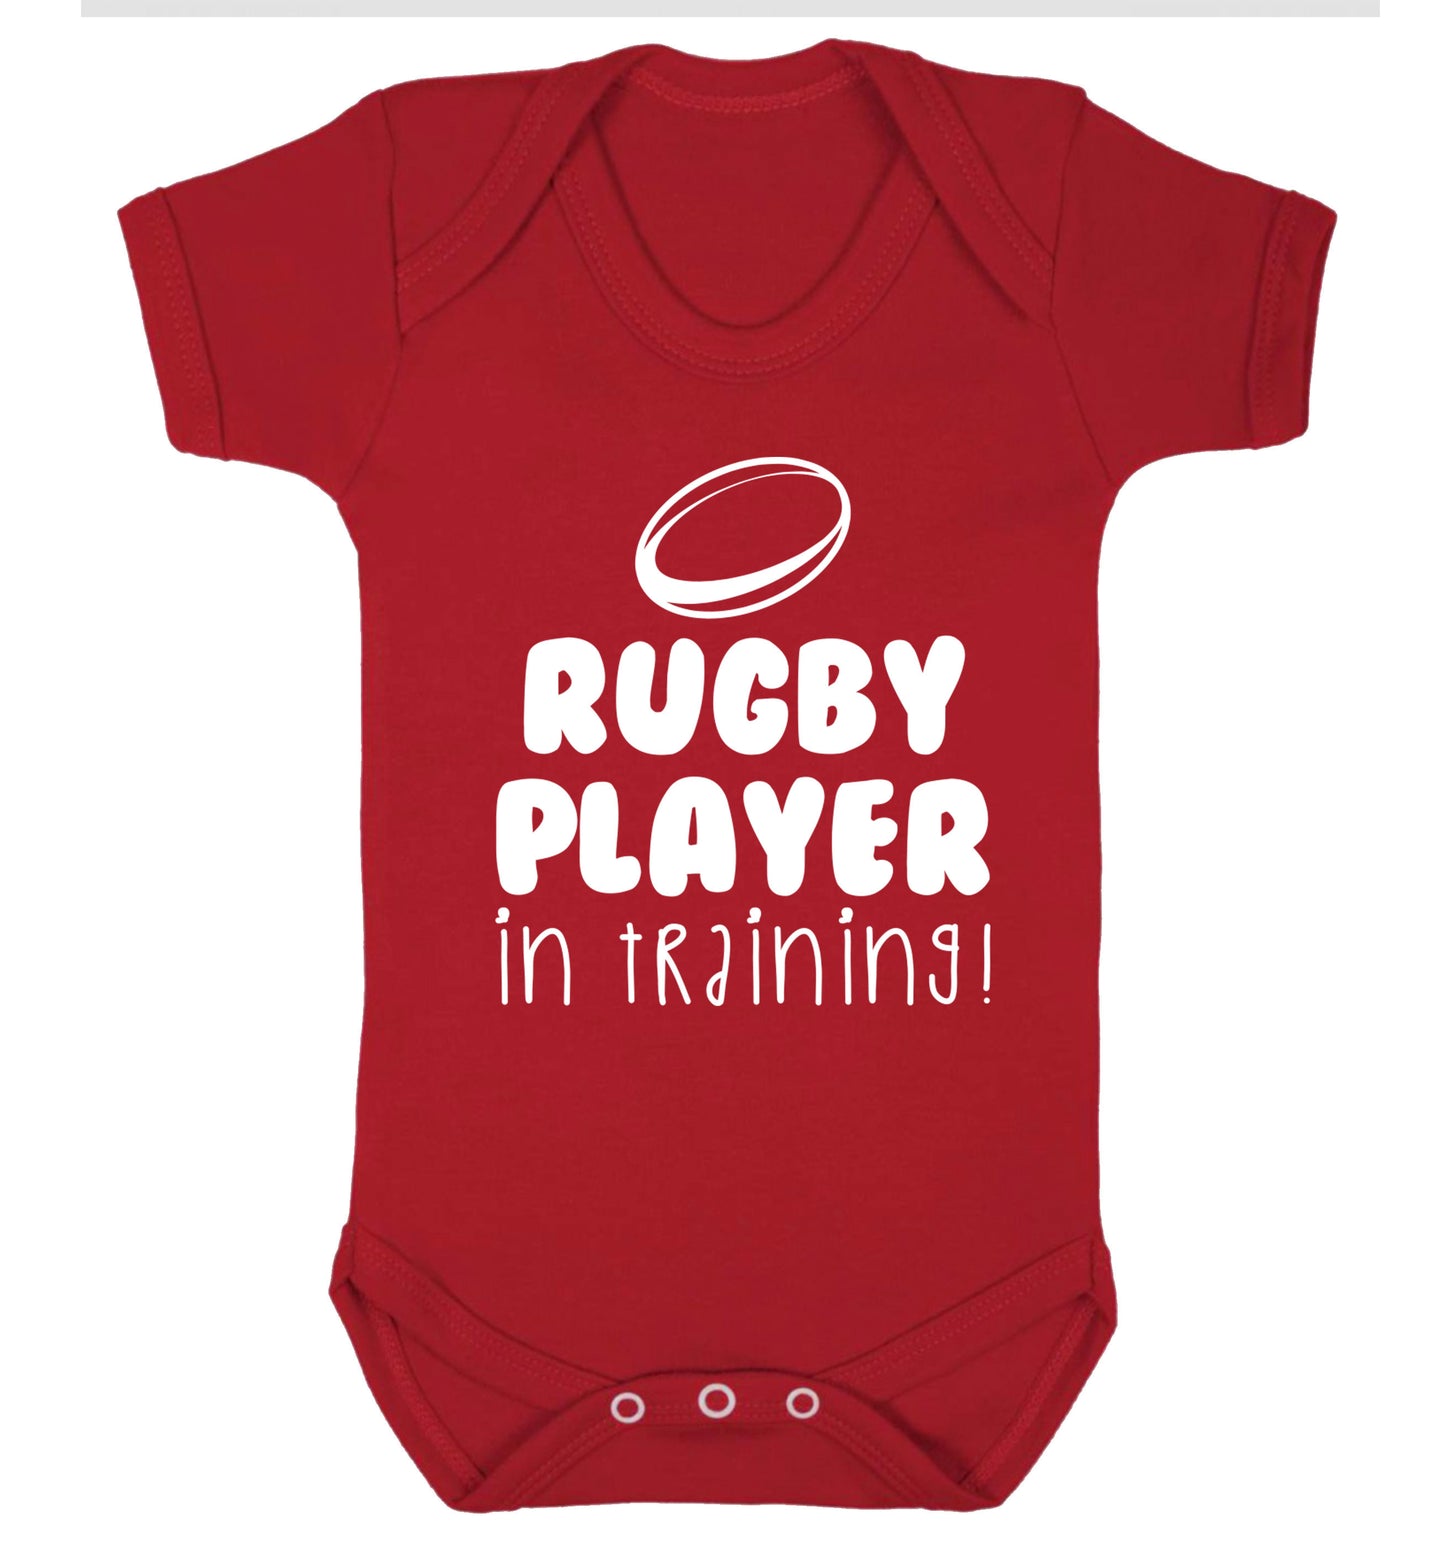 Rugby player in training Baby Vest red 18-24 months